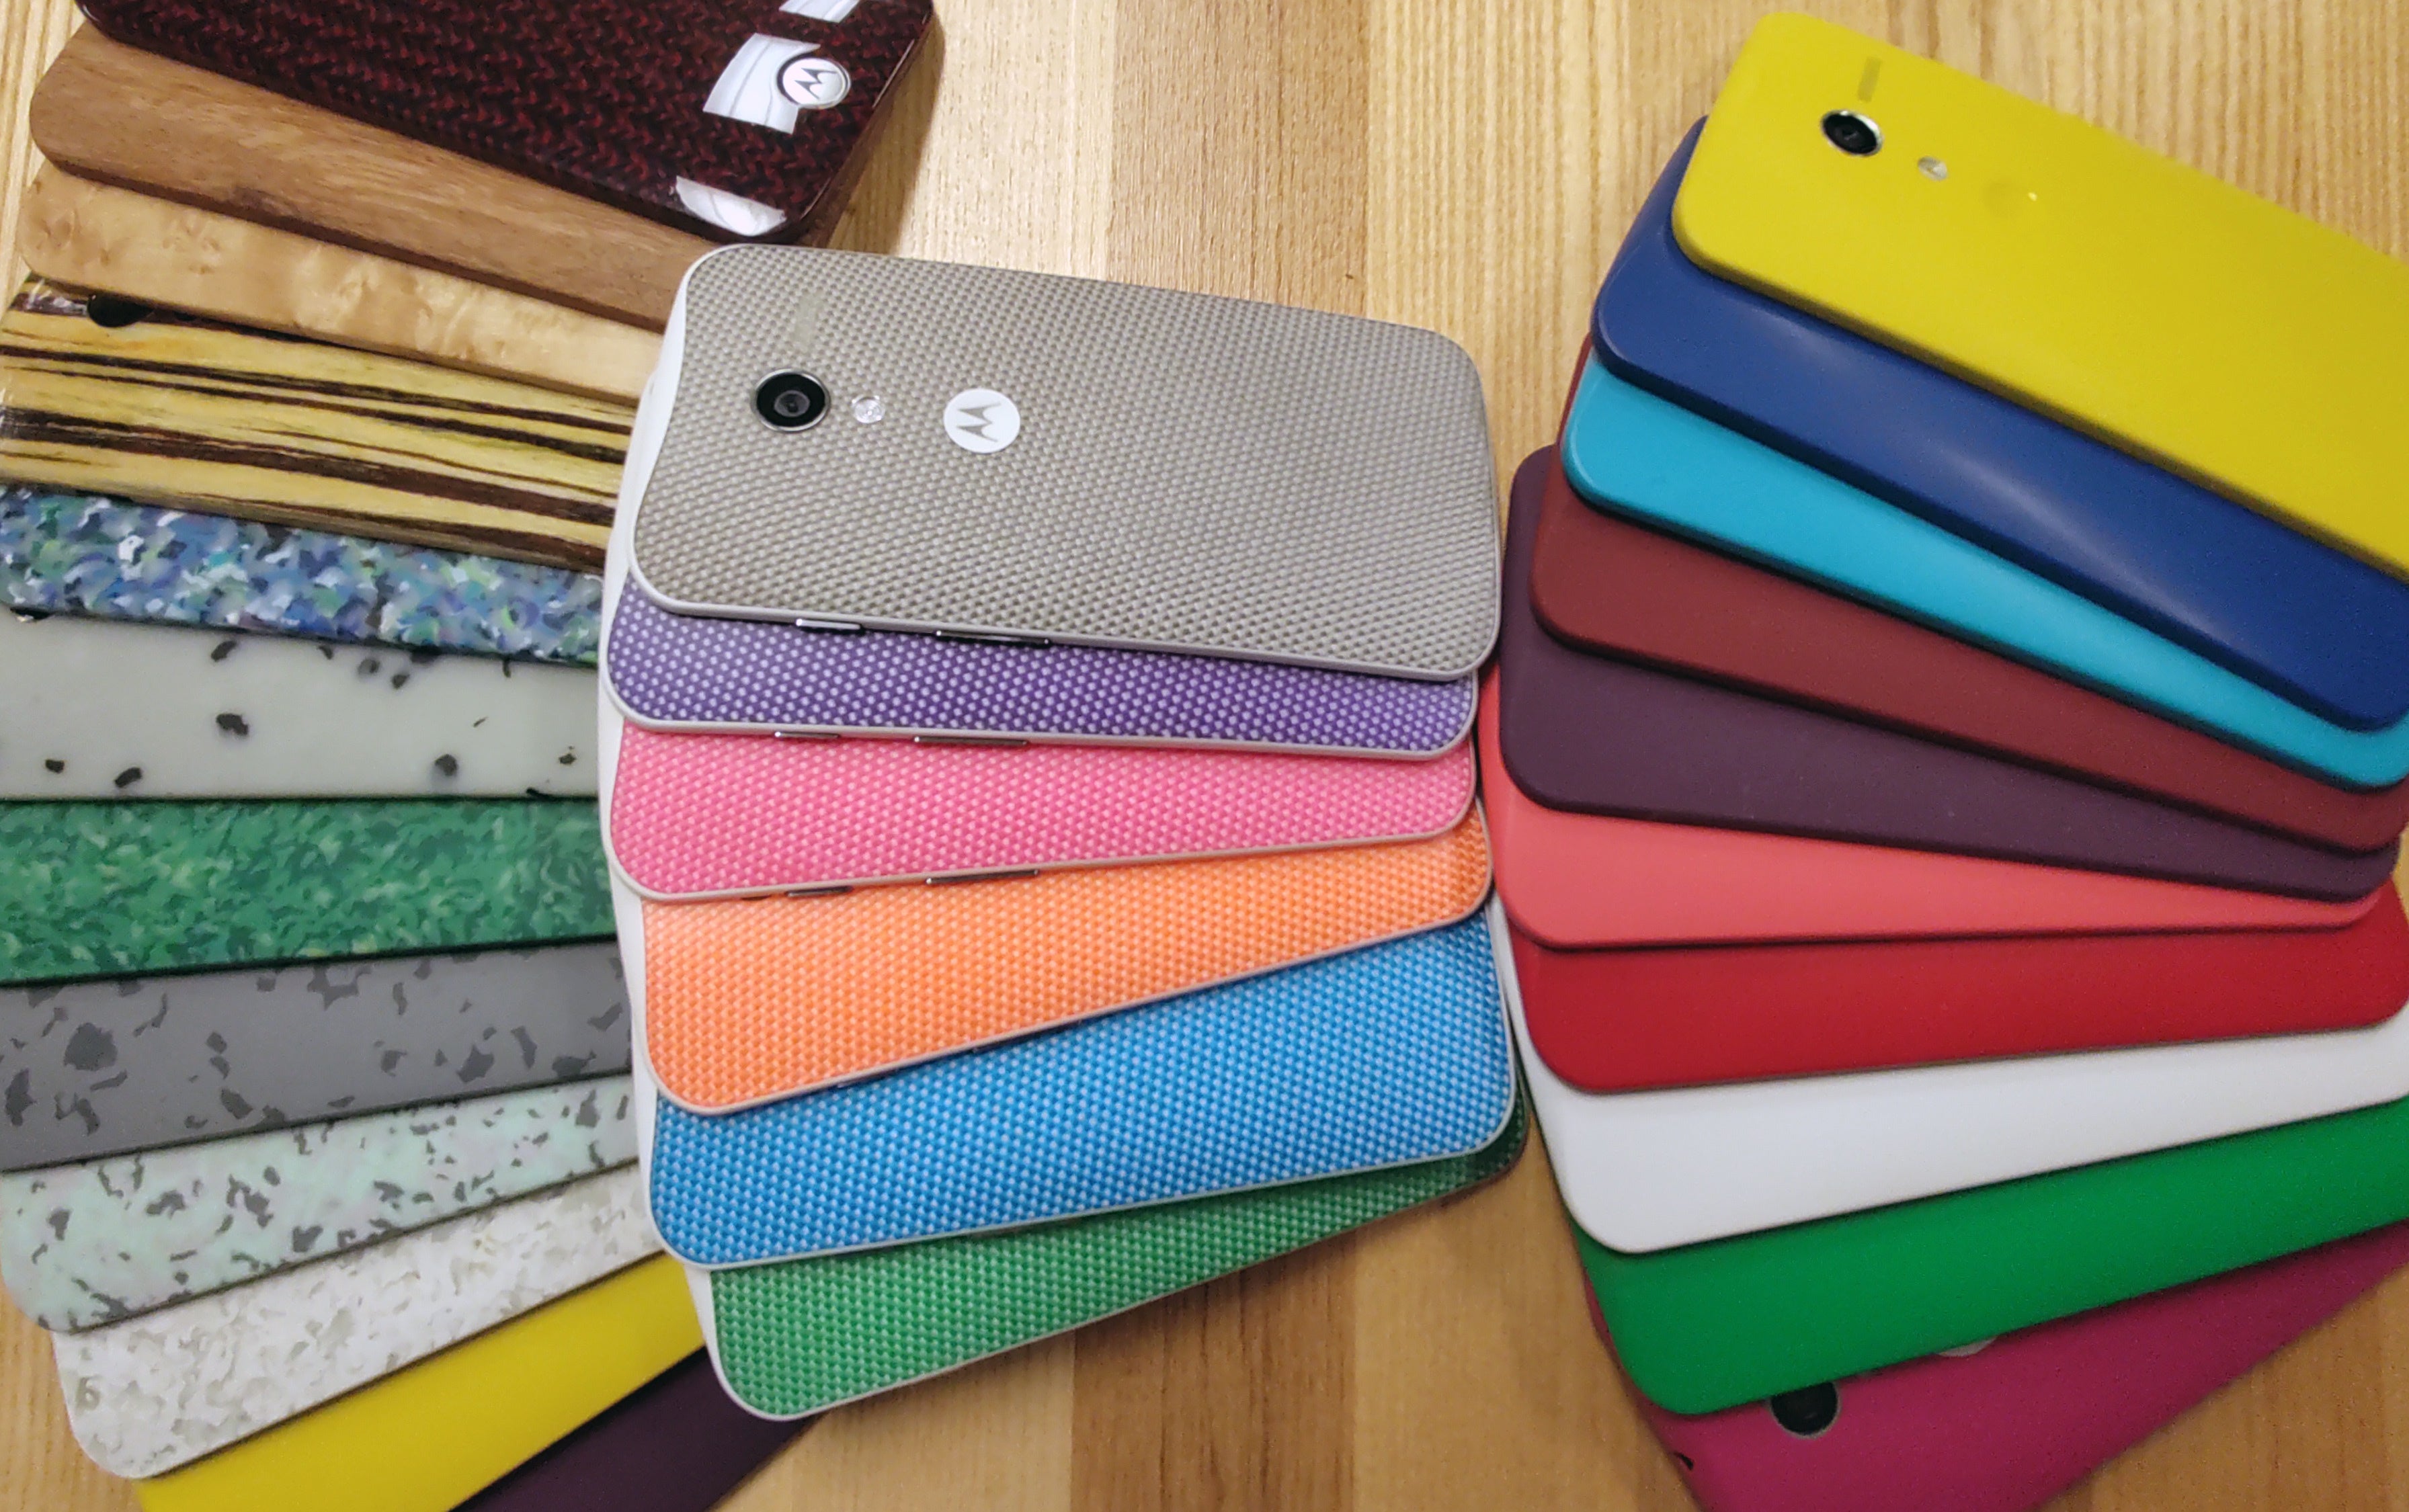 Motorola has never been shy to experiment with colors and patterns - How do you design a phone? Motorola&#039;s VP of Design gives us a peek behind the scenes